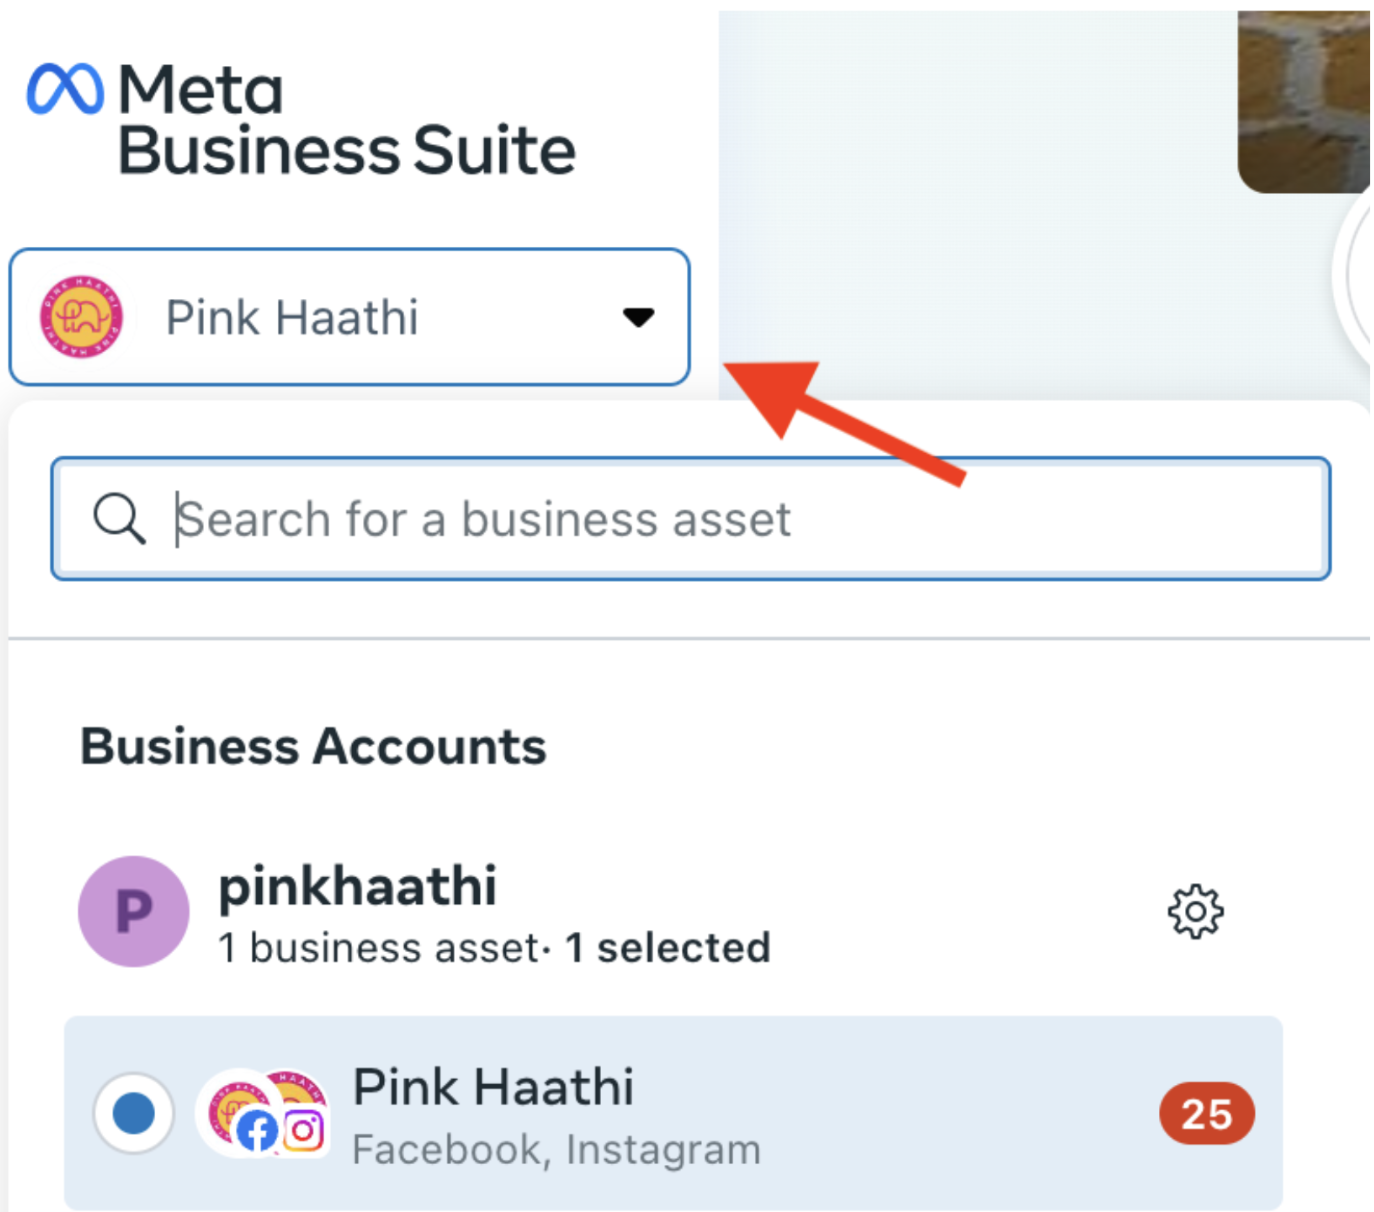 How to change Pages in Creator Studio. The image shows an arrow pointing to the page dropdown menu on Meta Business Suite. 